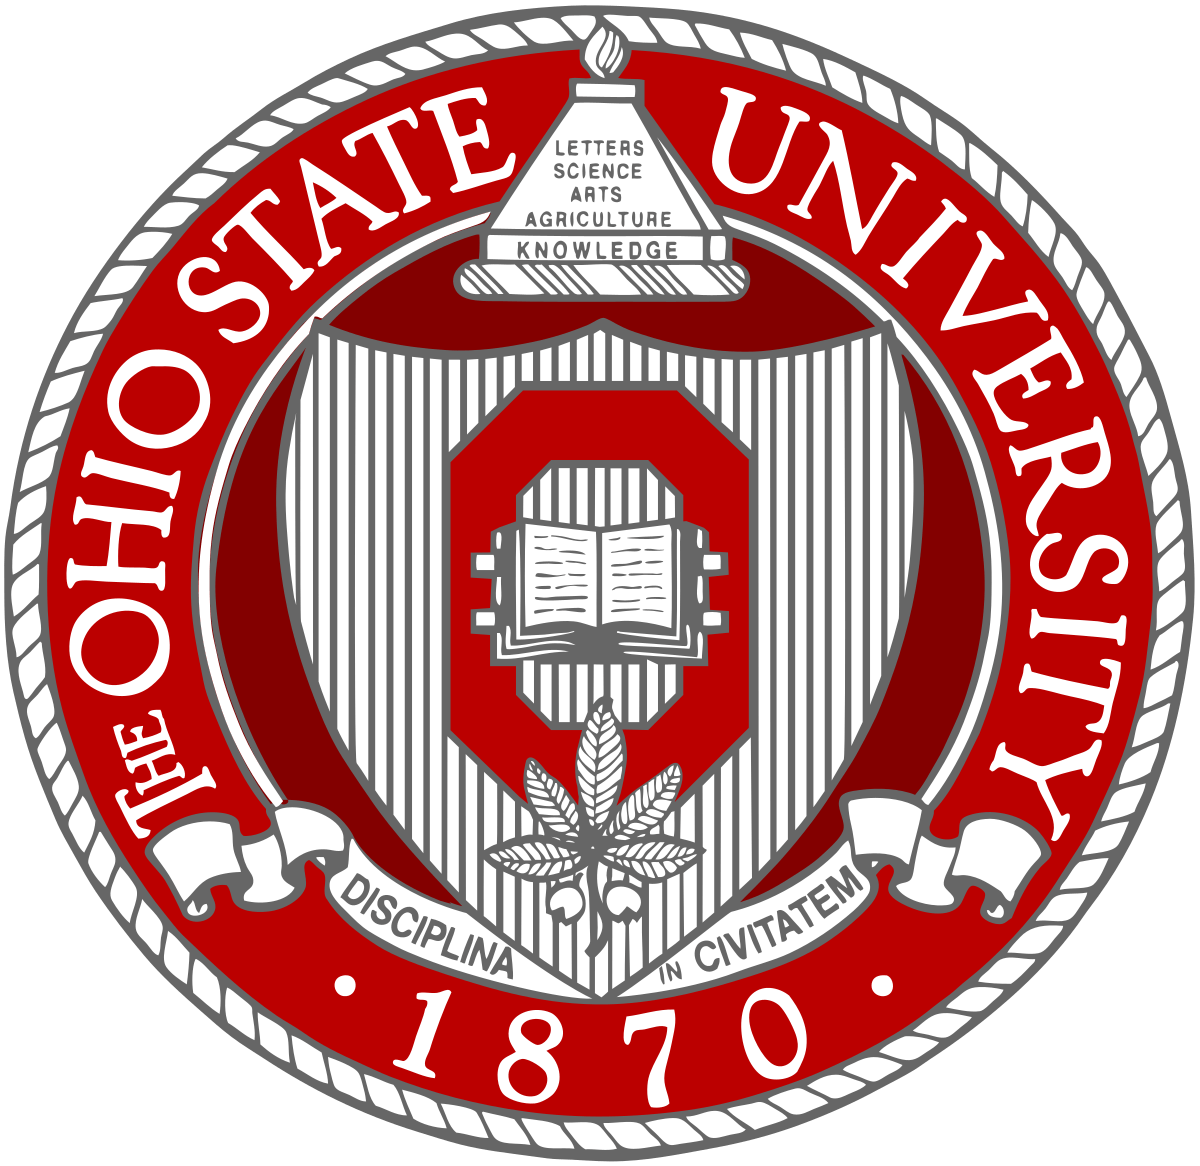 1200px-Ohio_State_University_seal.svg_.png